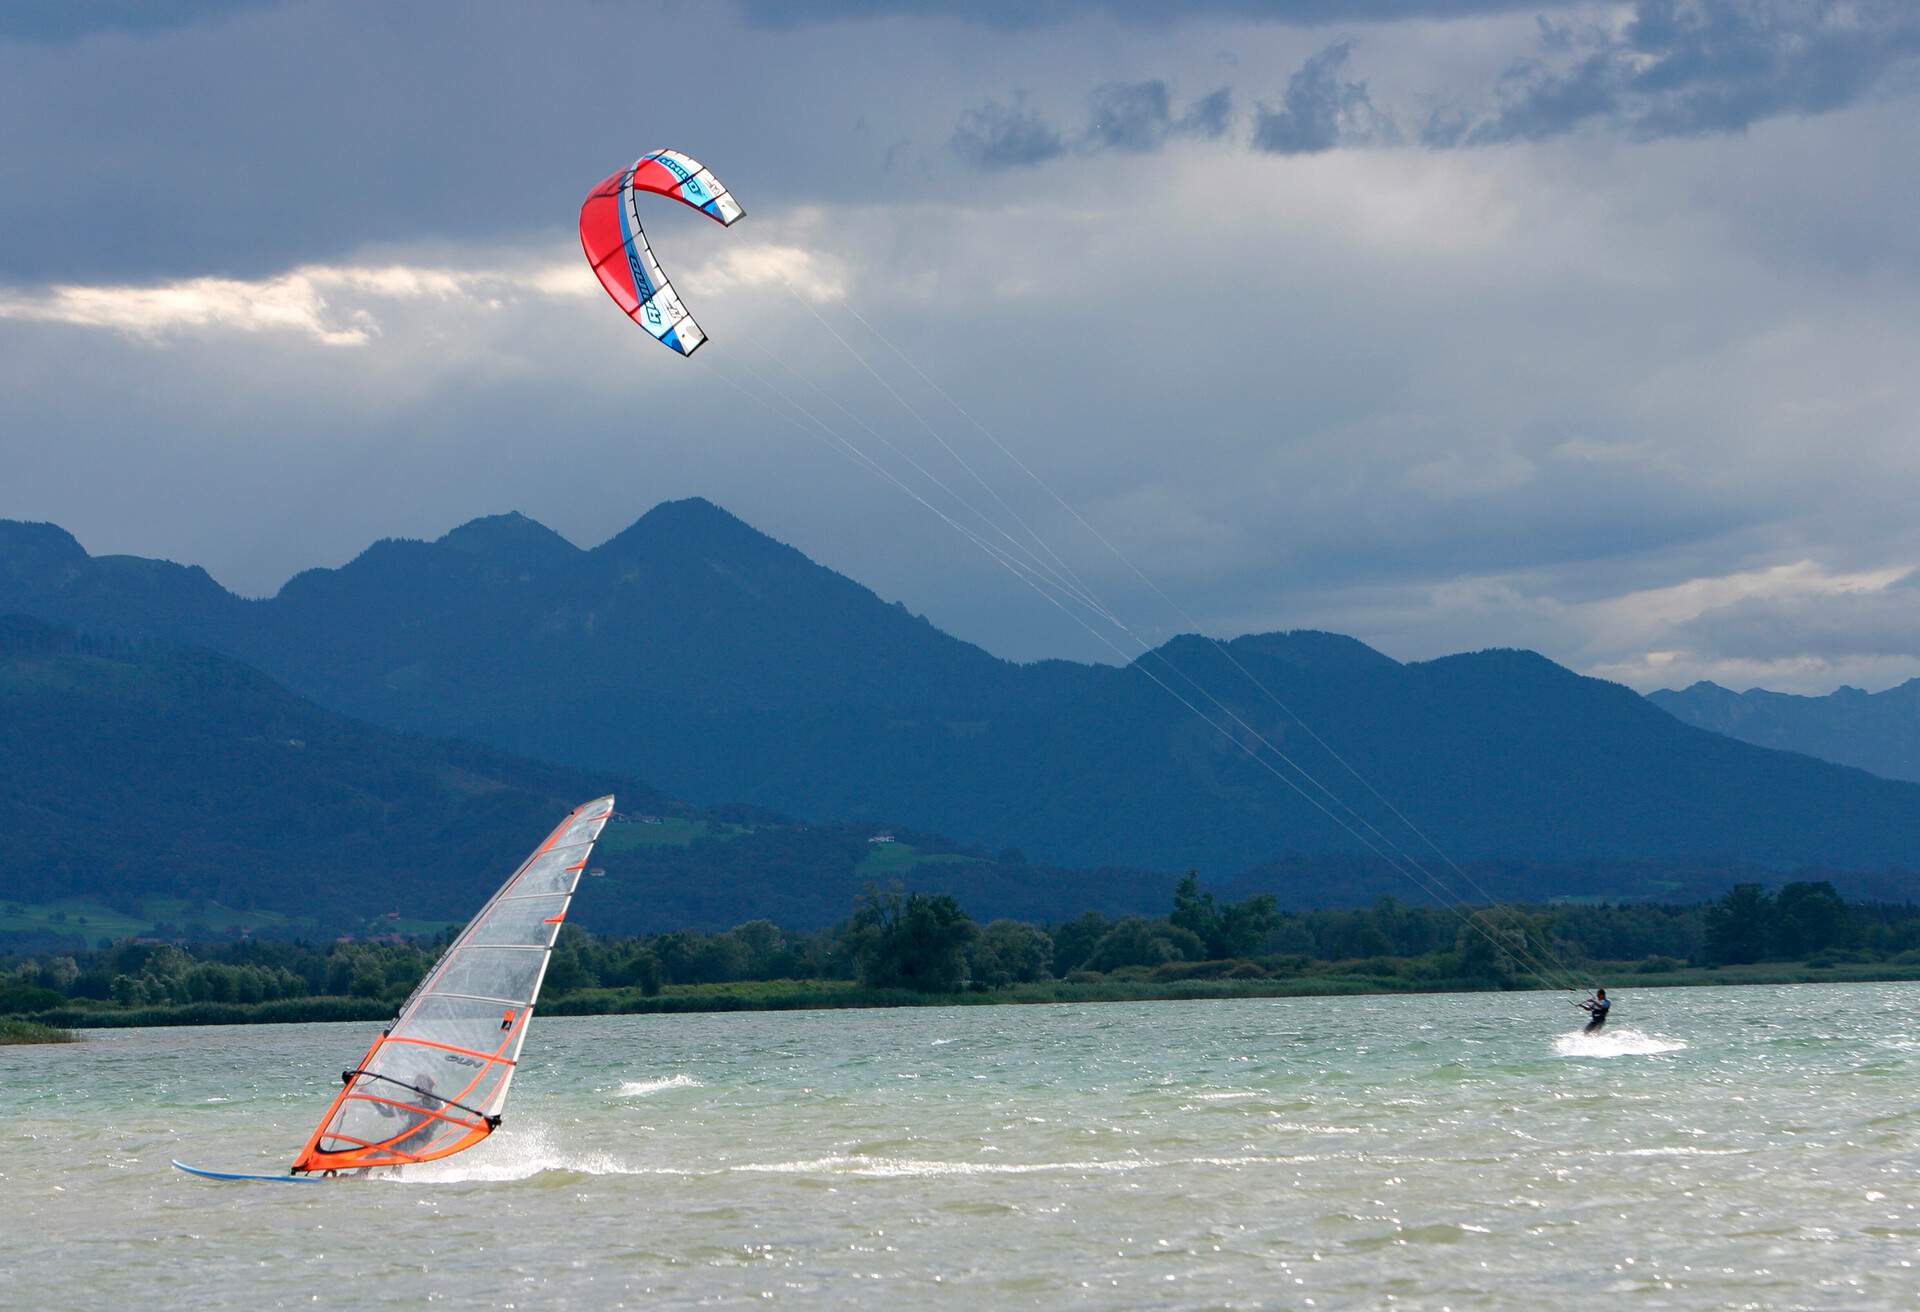 DEST_GERMANY_BAVARIA_CHIEMSEE-LAKE_THEME_PEOPLE_KITEBOARD--GettyImages-81620673